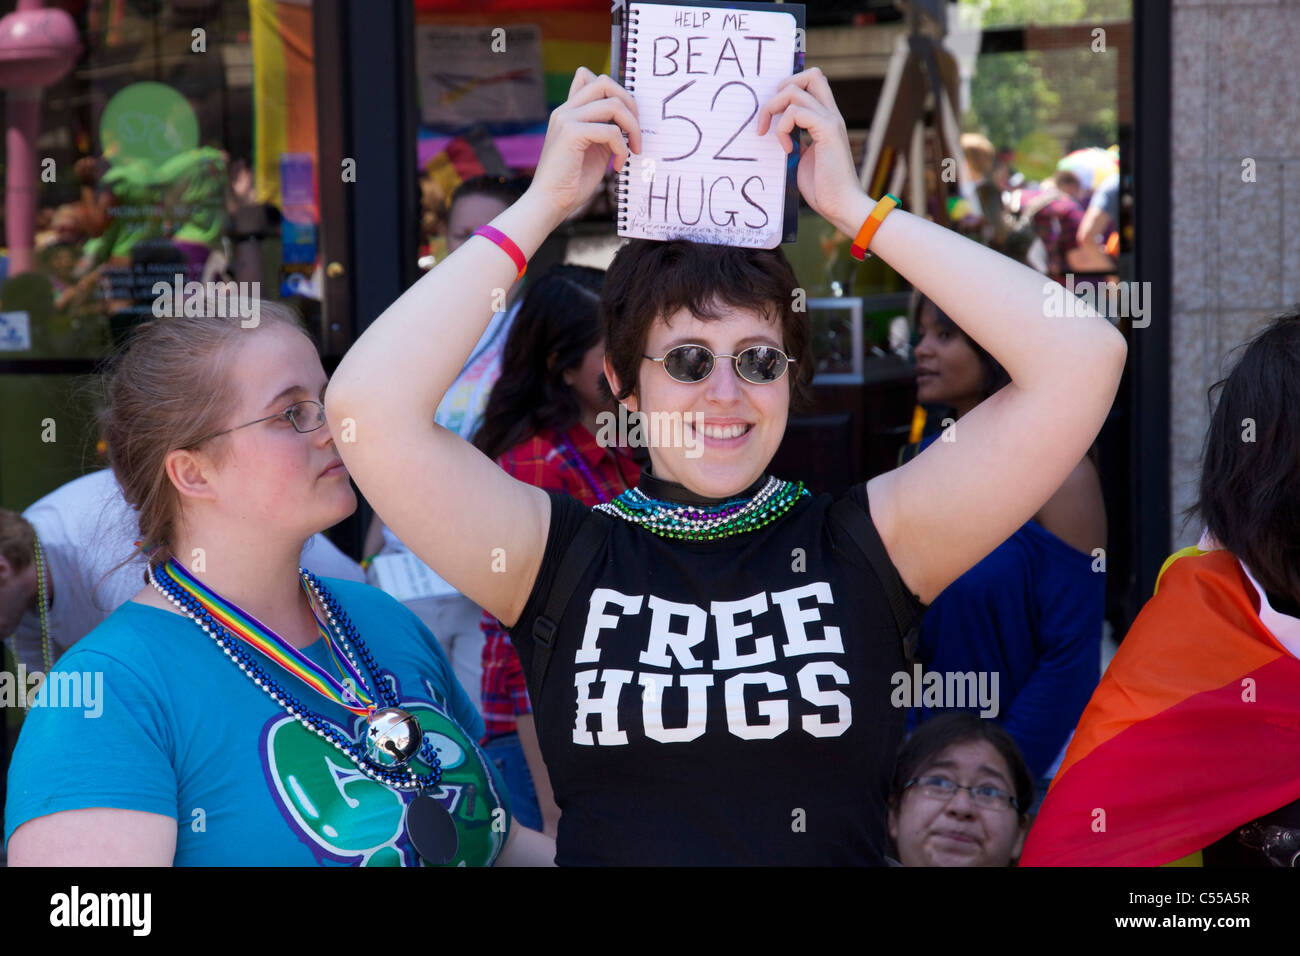 spectator-offering-free-hugs-at-the-chic